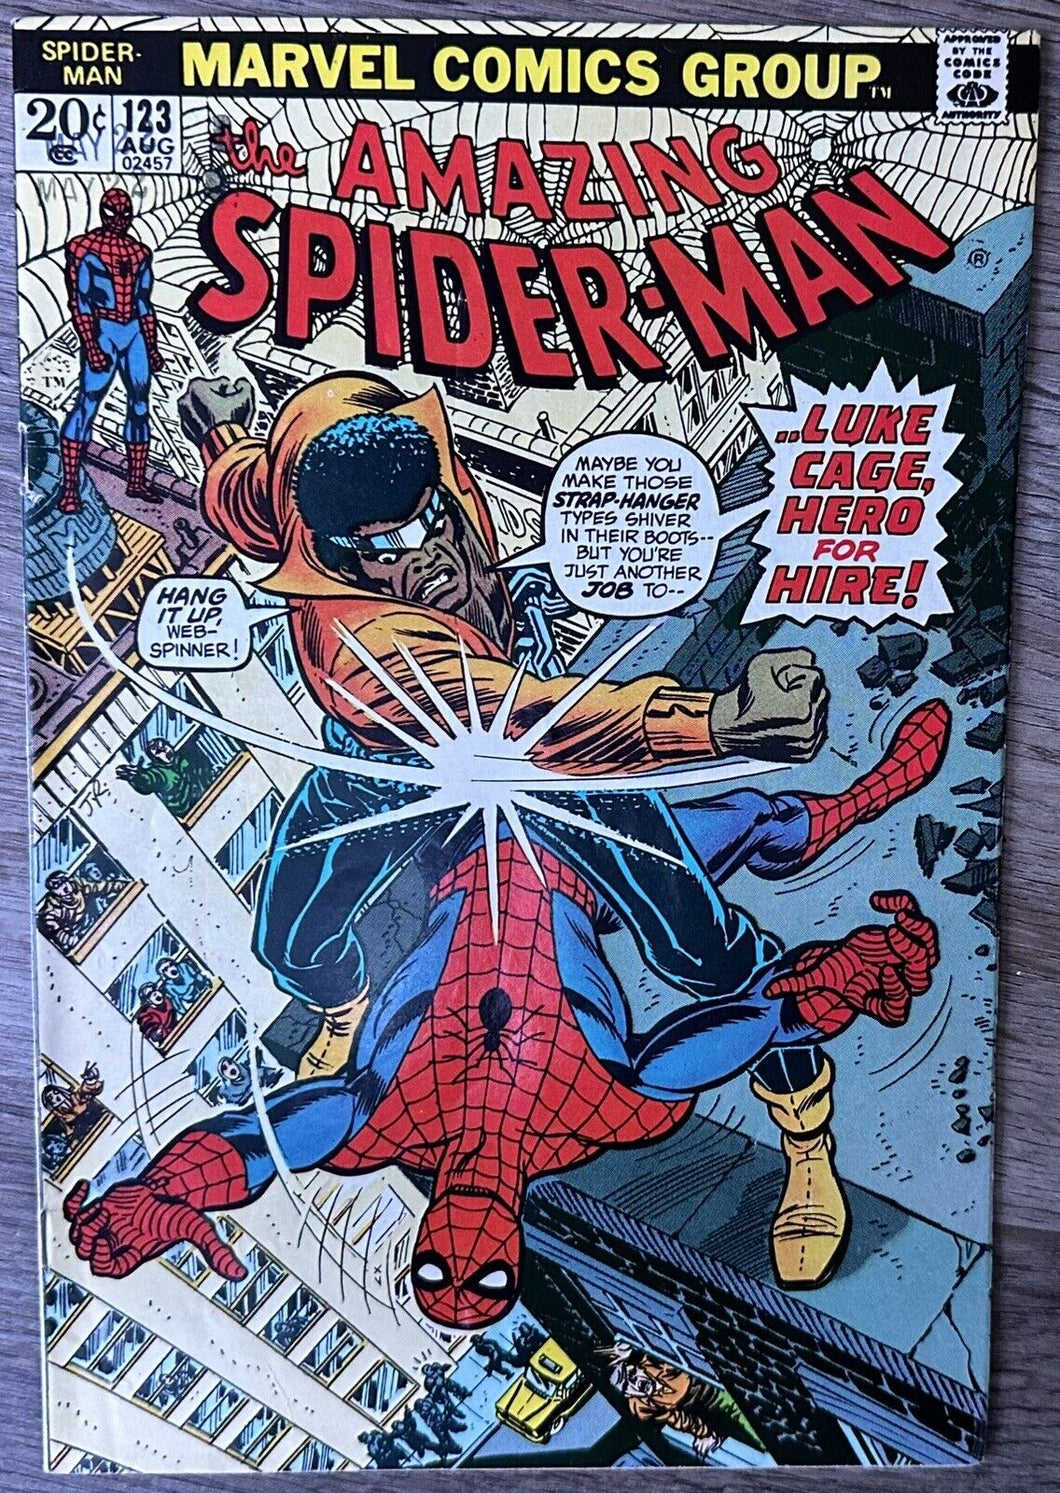 THE AMAZING SPIDER-MAN #123 (MARVEL,1973) FUNERAL OF GWEN STACY BRONZE